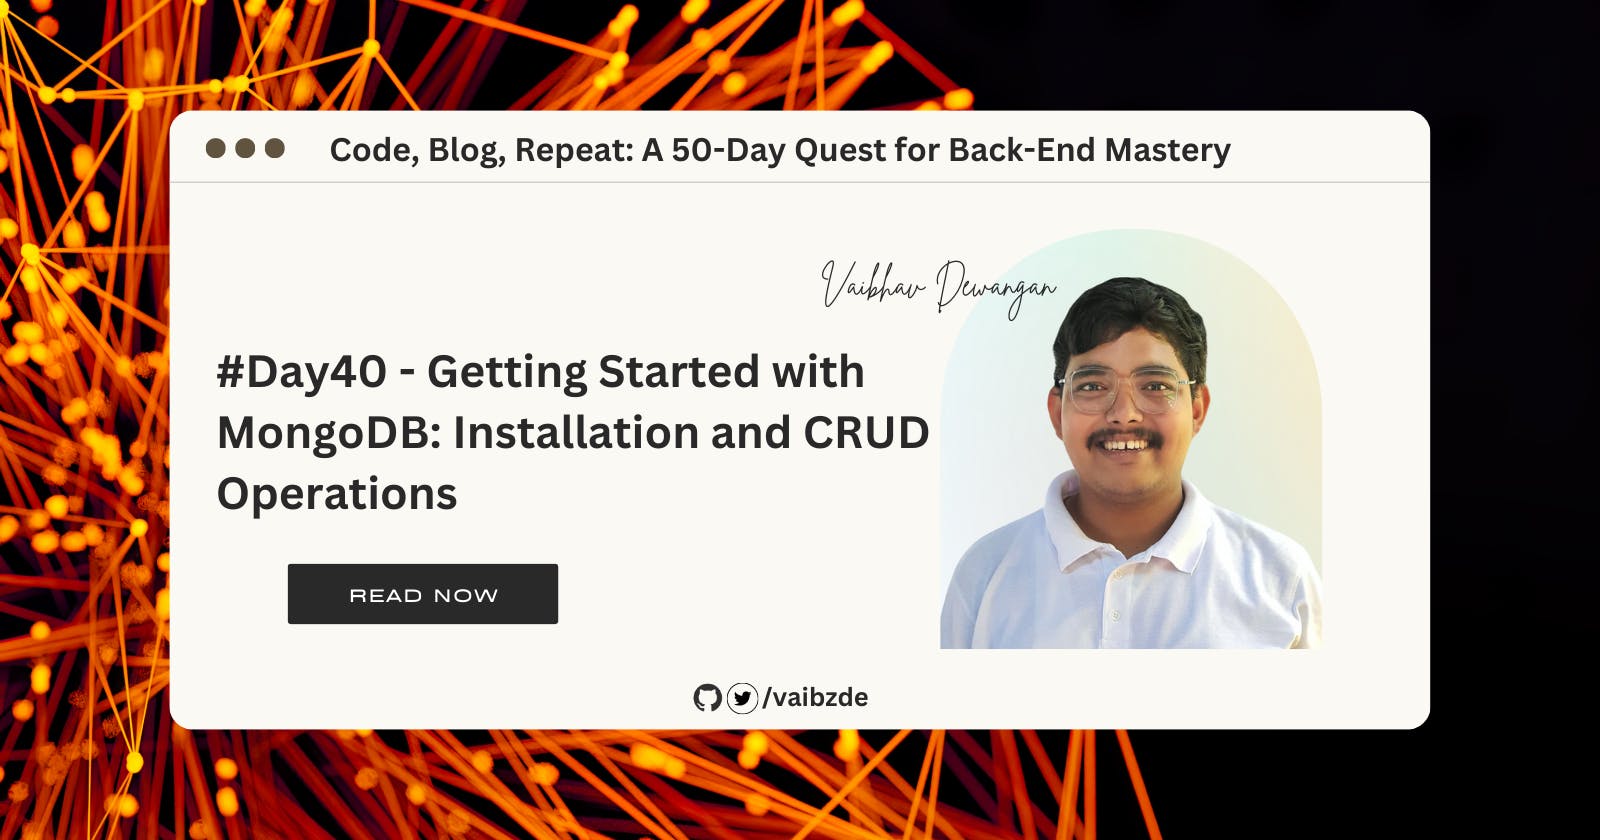 #Day40 - Getting Started with MongoDB: Installation and CRUD Operations